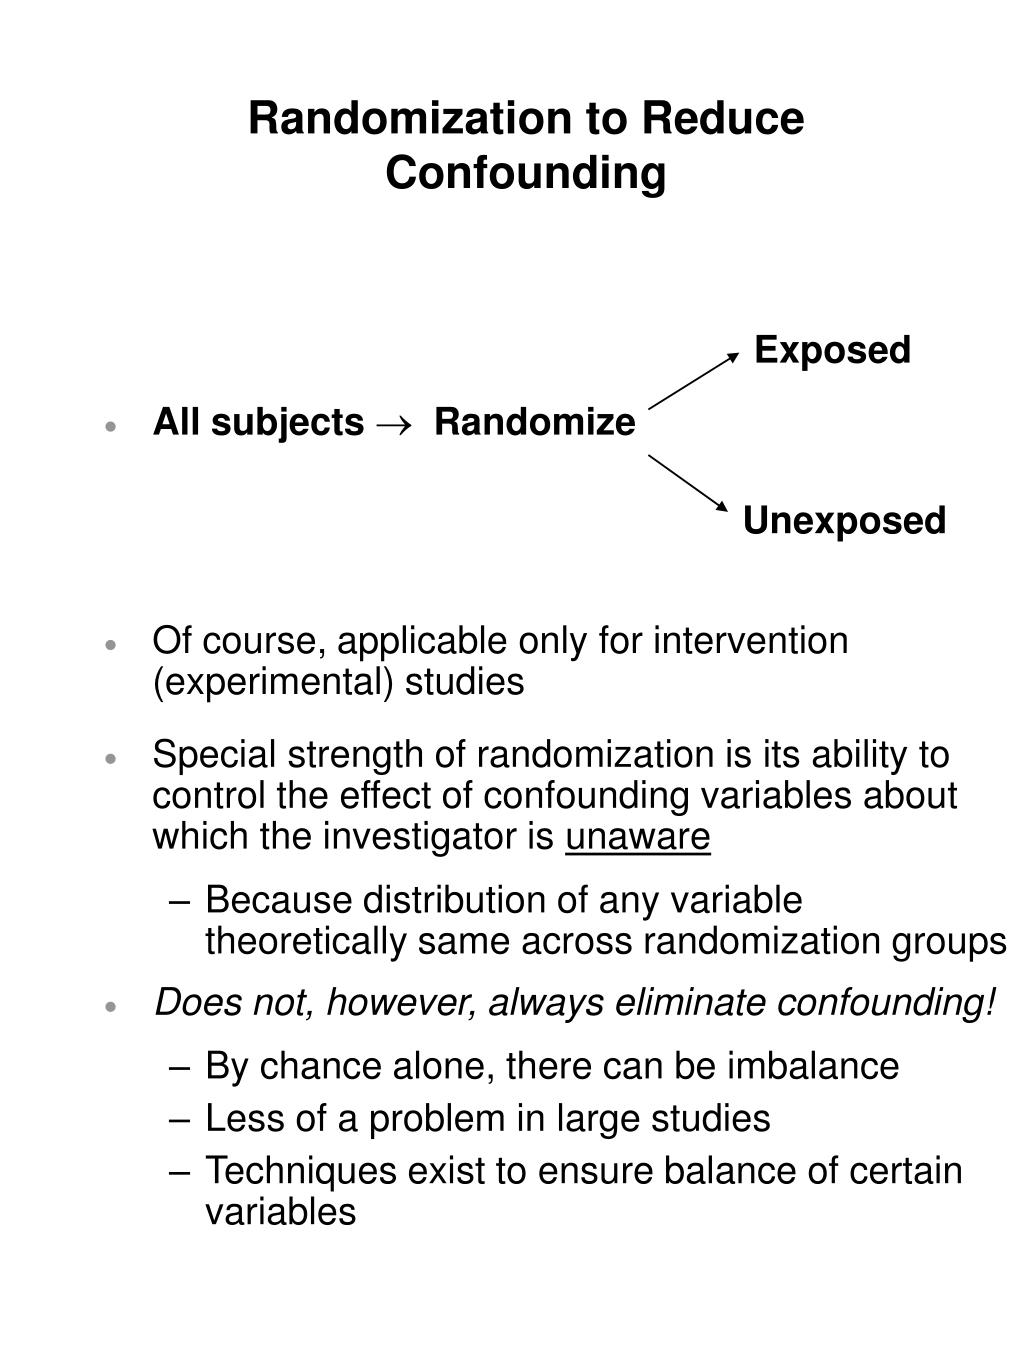 how does random assignment reduce confounding variables